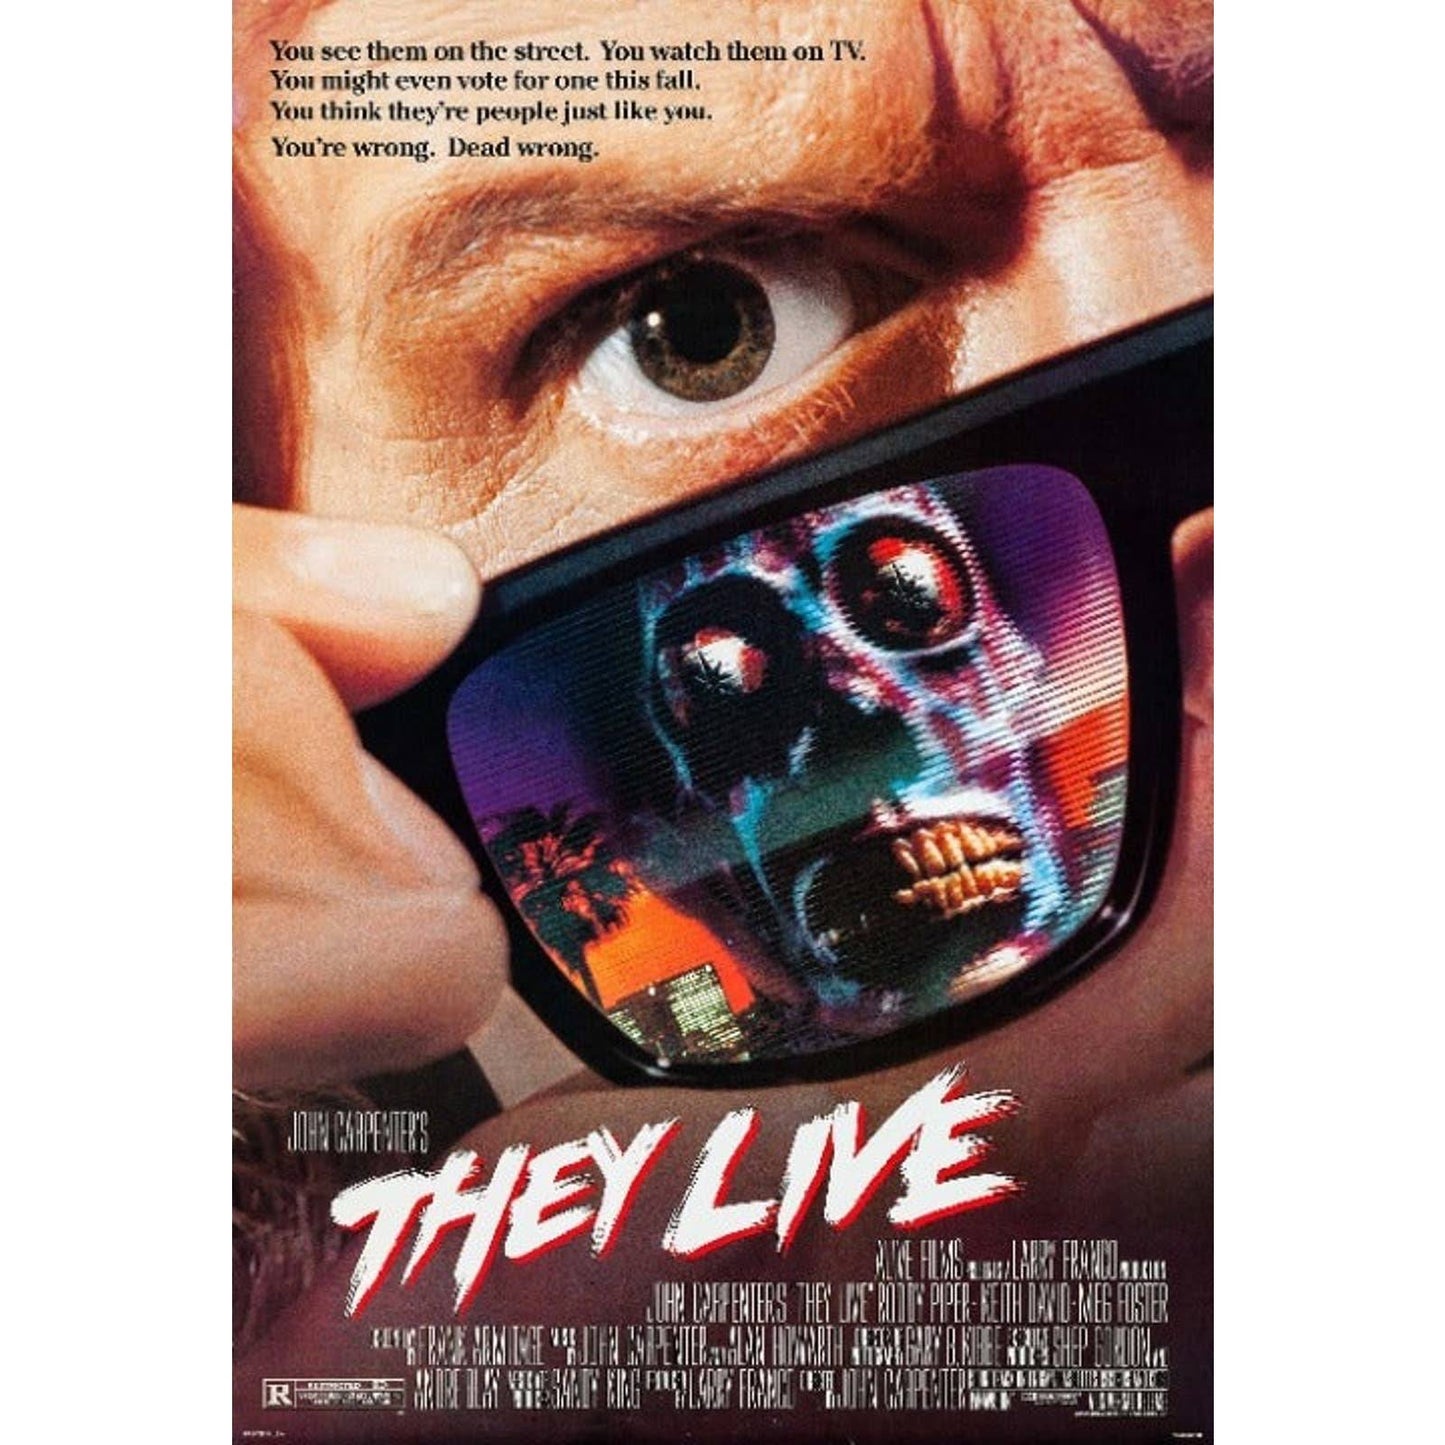 16” x 24" THEY LIVE Canvas Print Wall Art